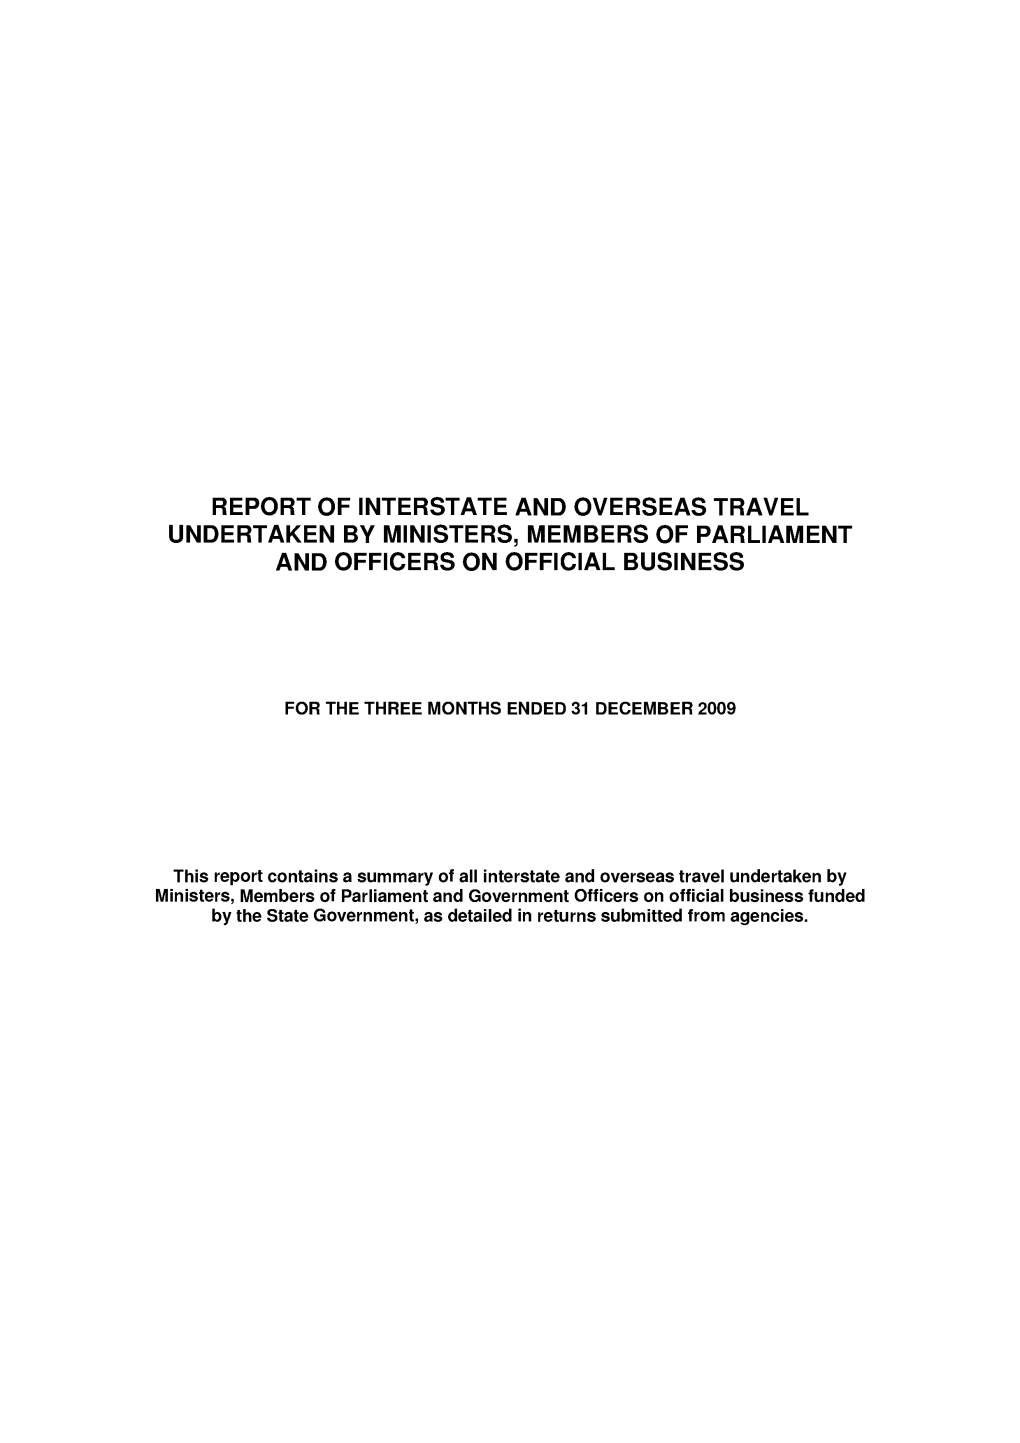 Report of Interstate and Overseas Travel Undertaken by Ministers, Members of Parliament and Officers on Official Business